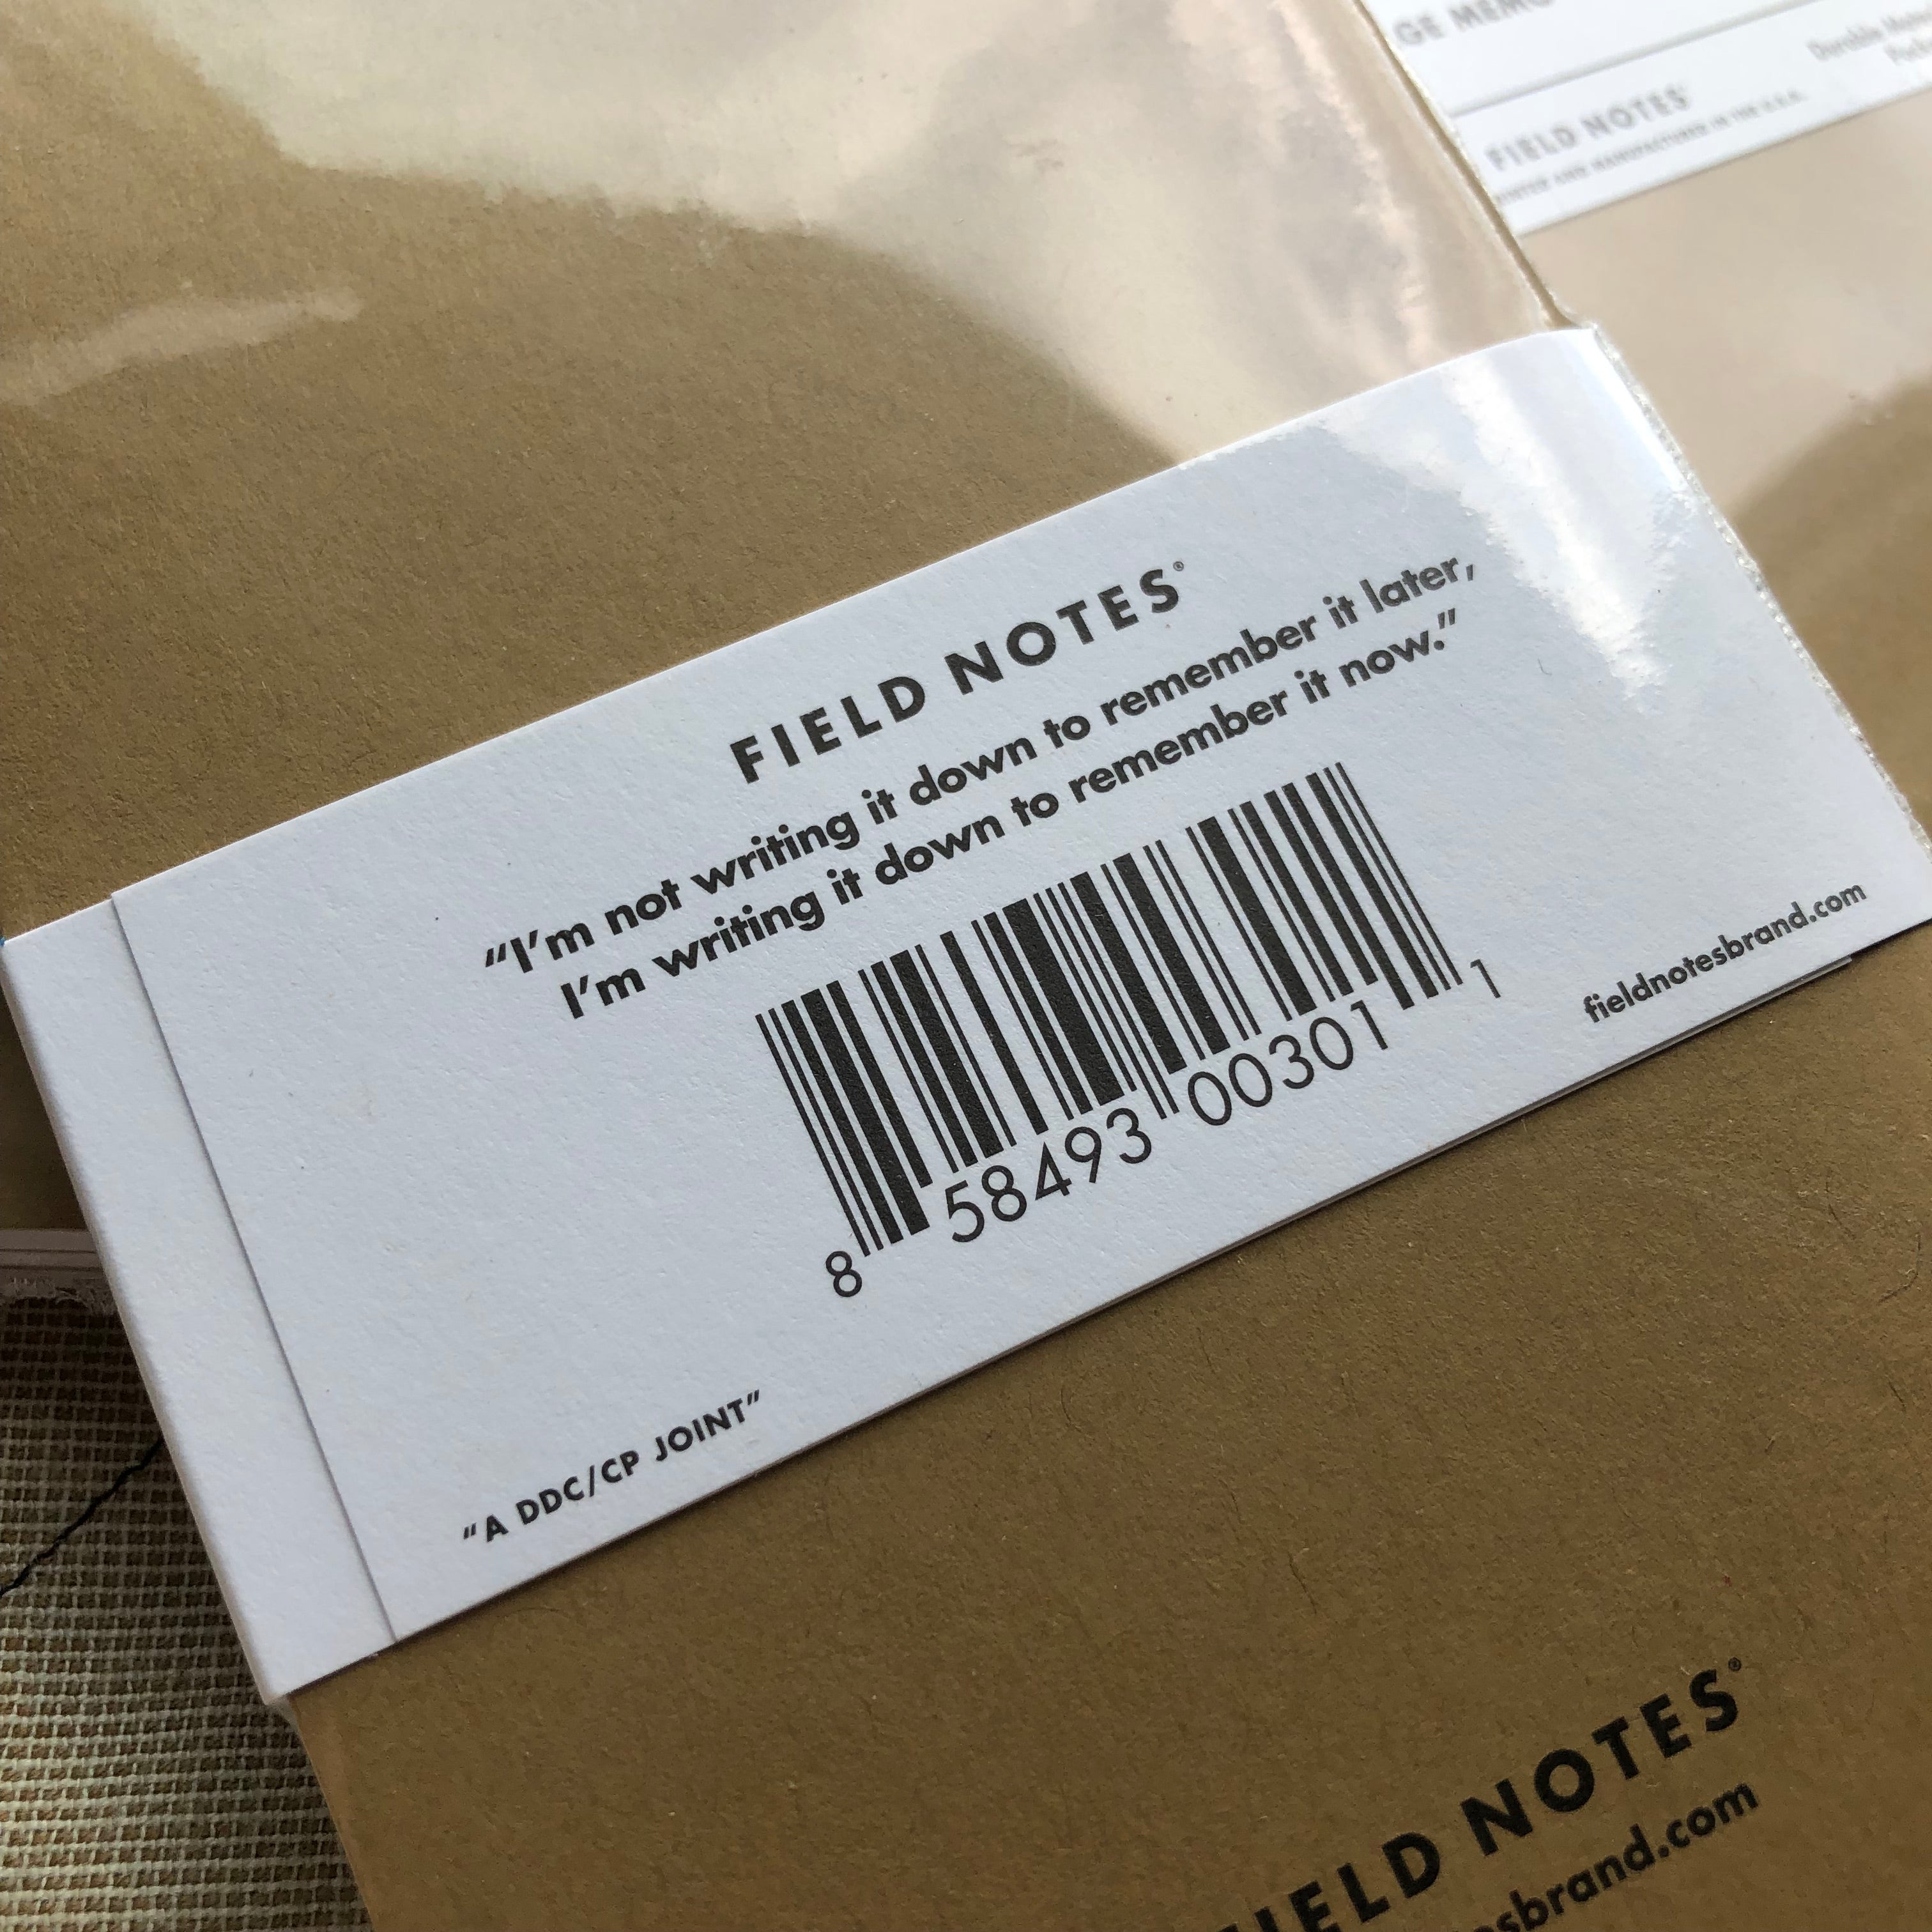 Field Notes - 3 Pack